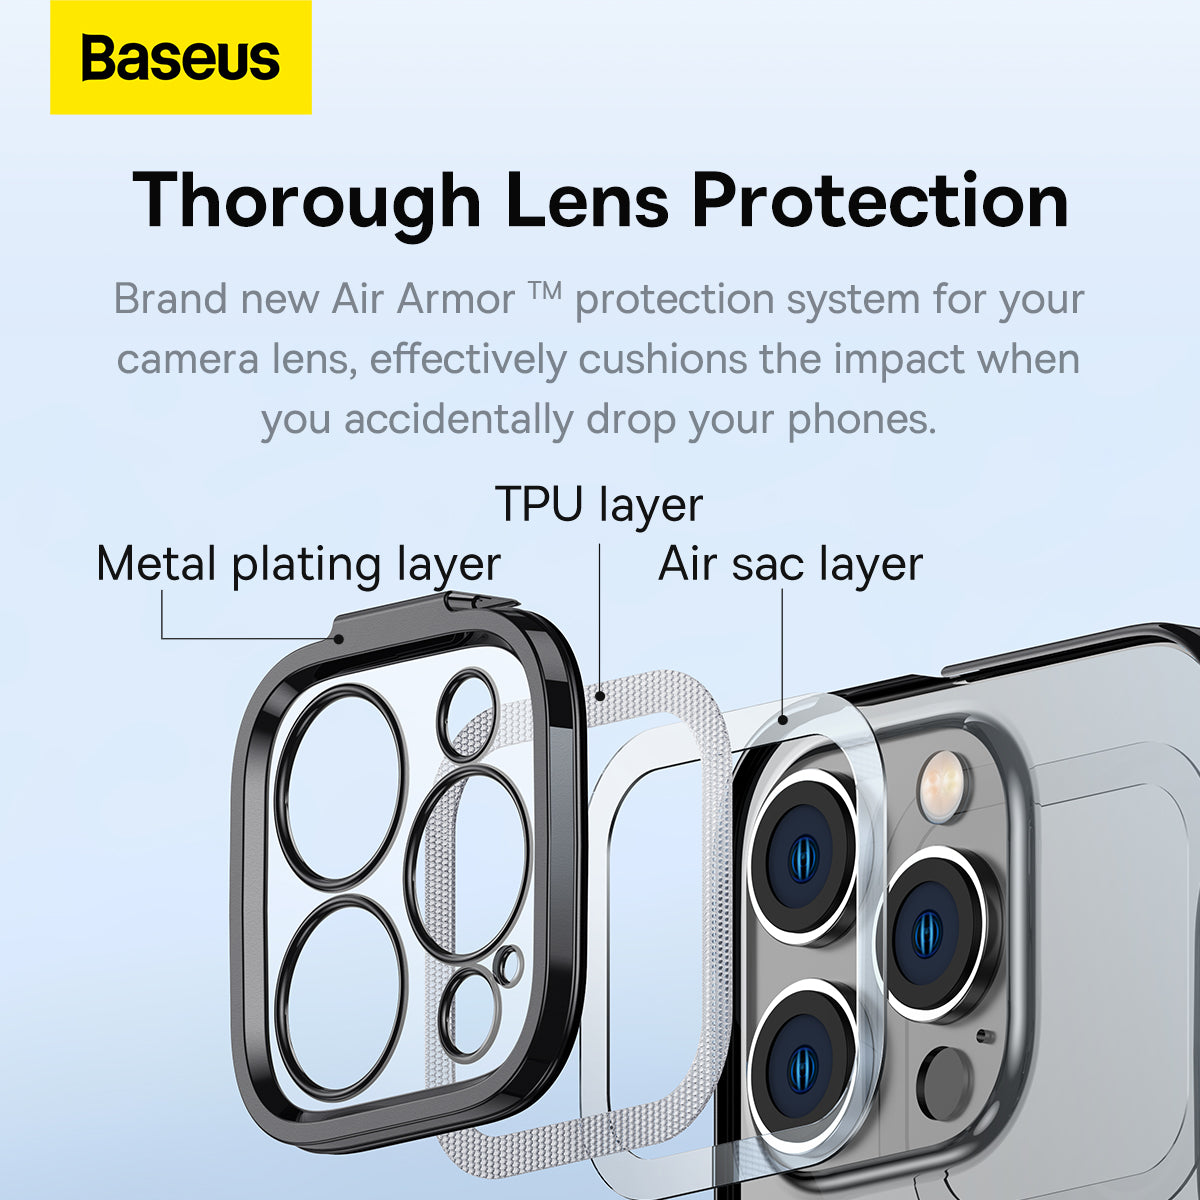 Baseus iP 14 Glitter Series Magnetic Case + FREE Tempered Glass Screen Protector Magsafe Strong Magnet Fingerprint Proof Lens Protection Electroplated Frame For iPhone 14 Pro Max Plus